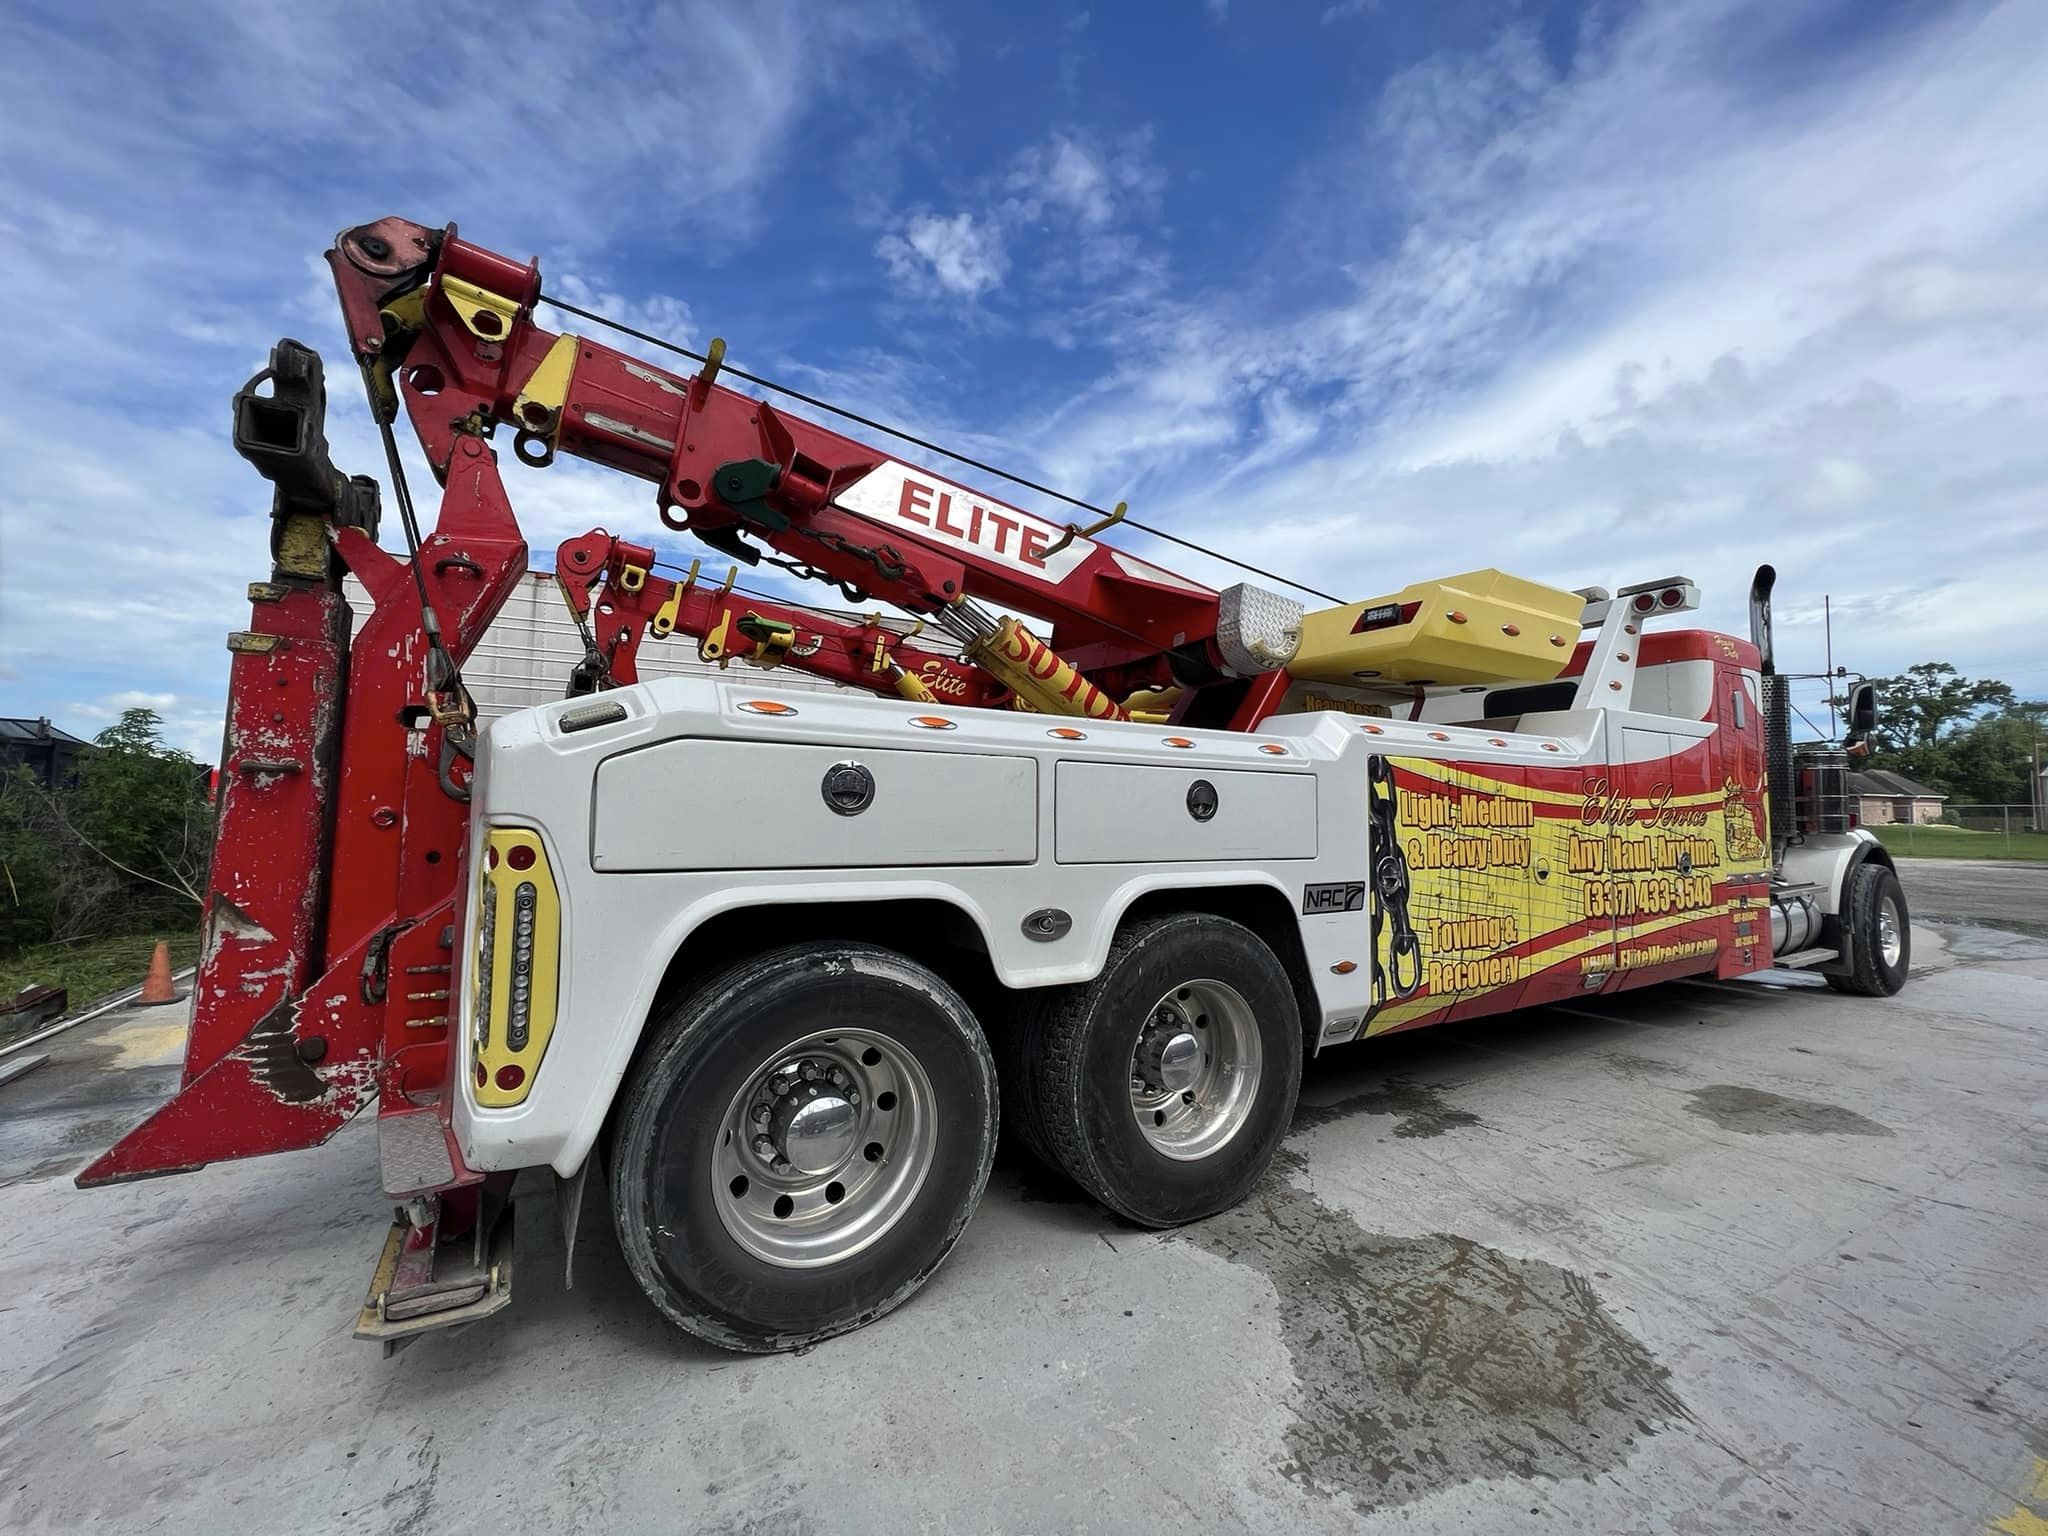 What Is Heavy Duty Towing?